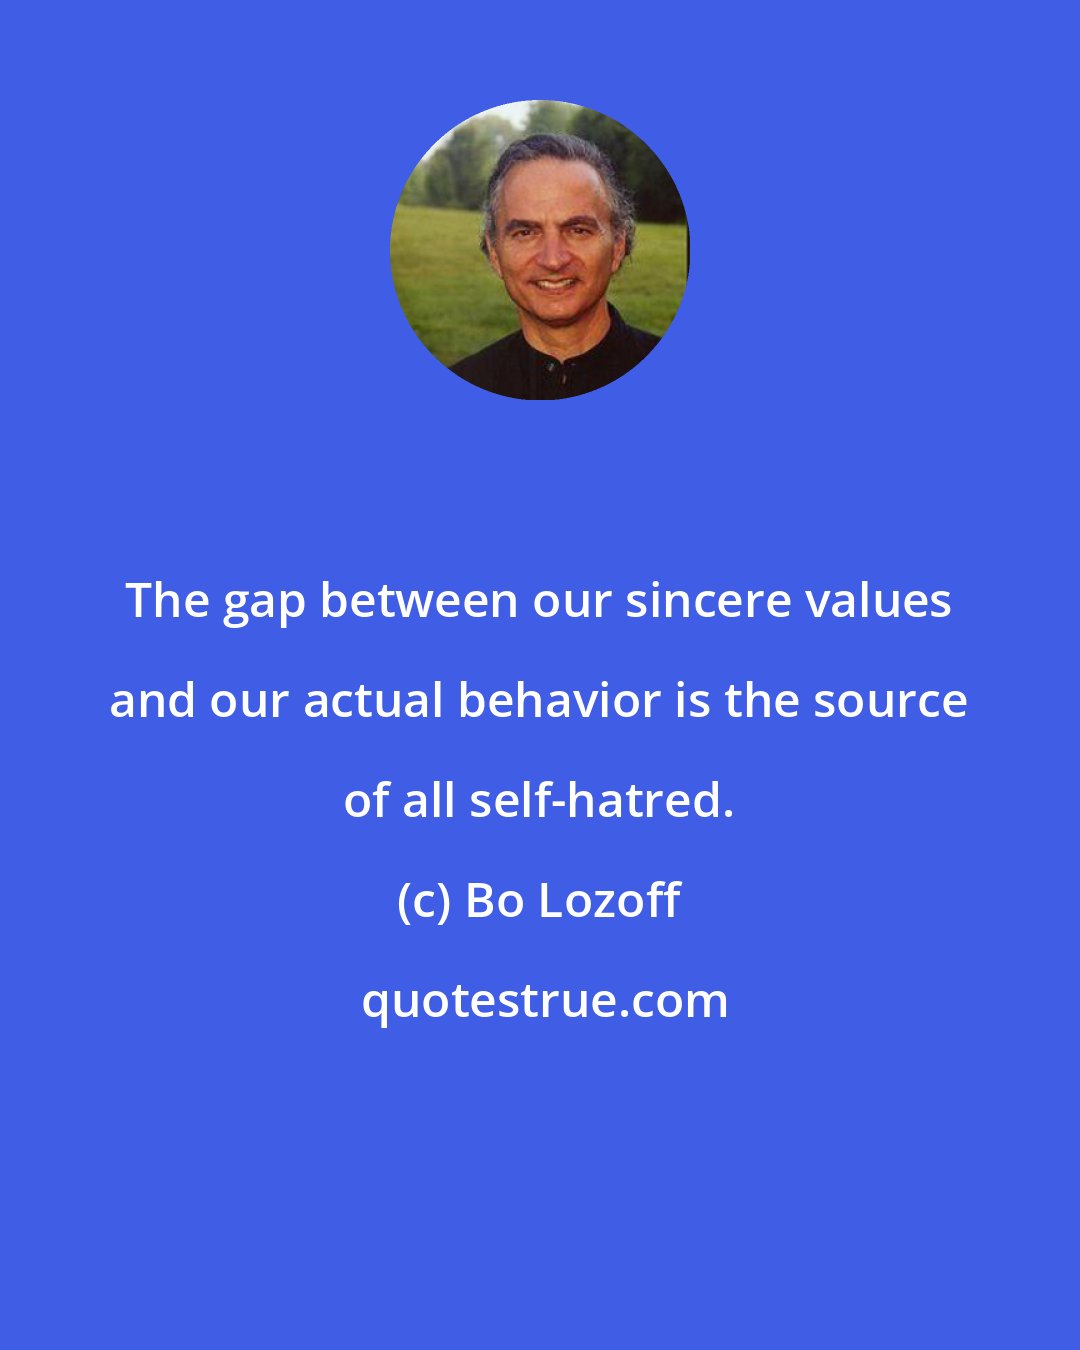 Bo Lozoff: The gap between our sincere values and our actual behavior is the source of all self-hatred.